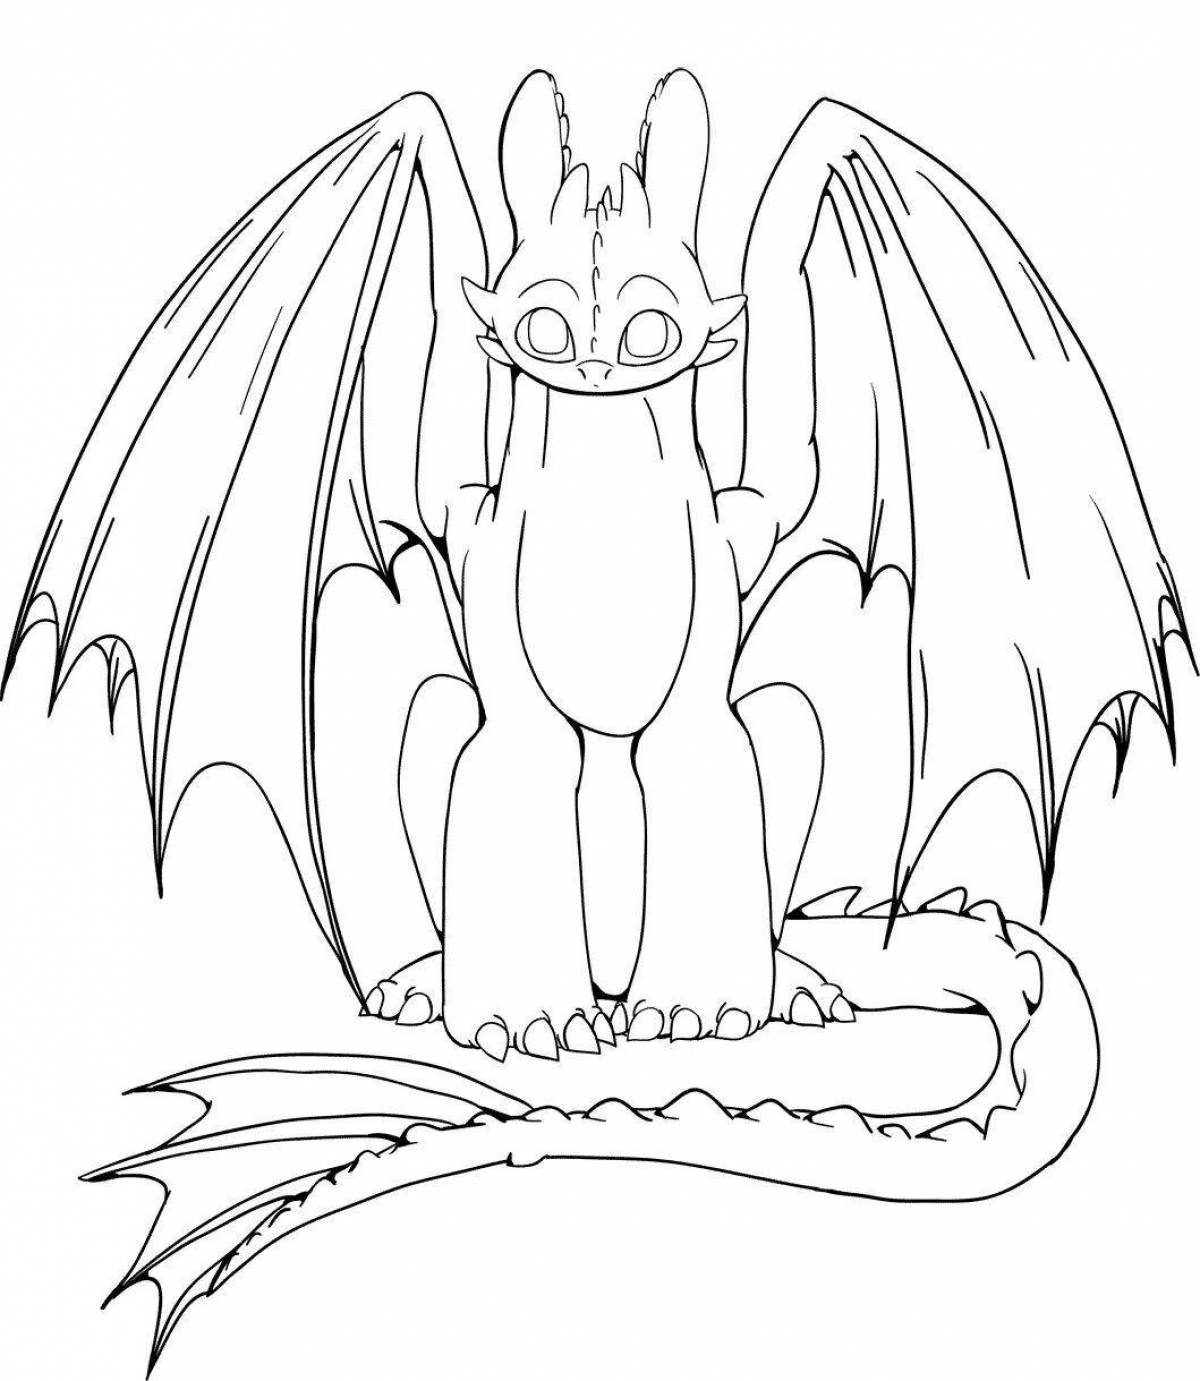 Exquisitely colored night fury coloring page